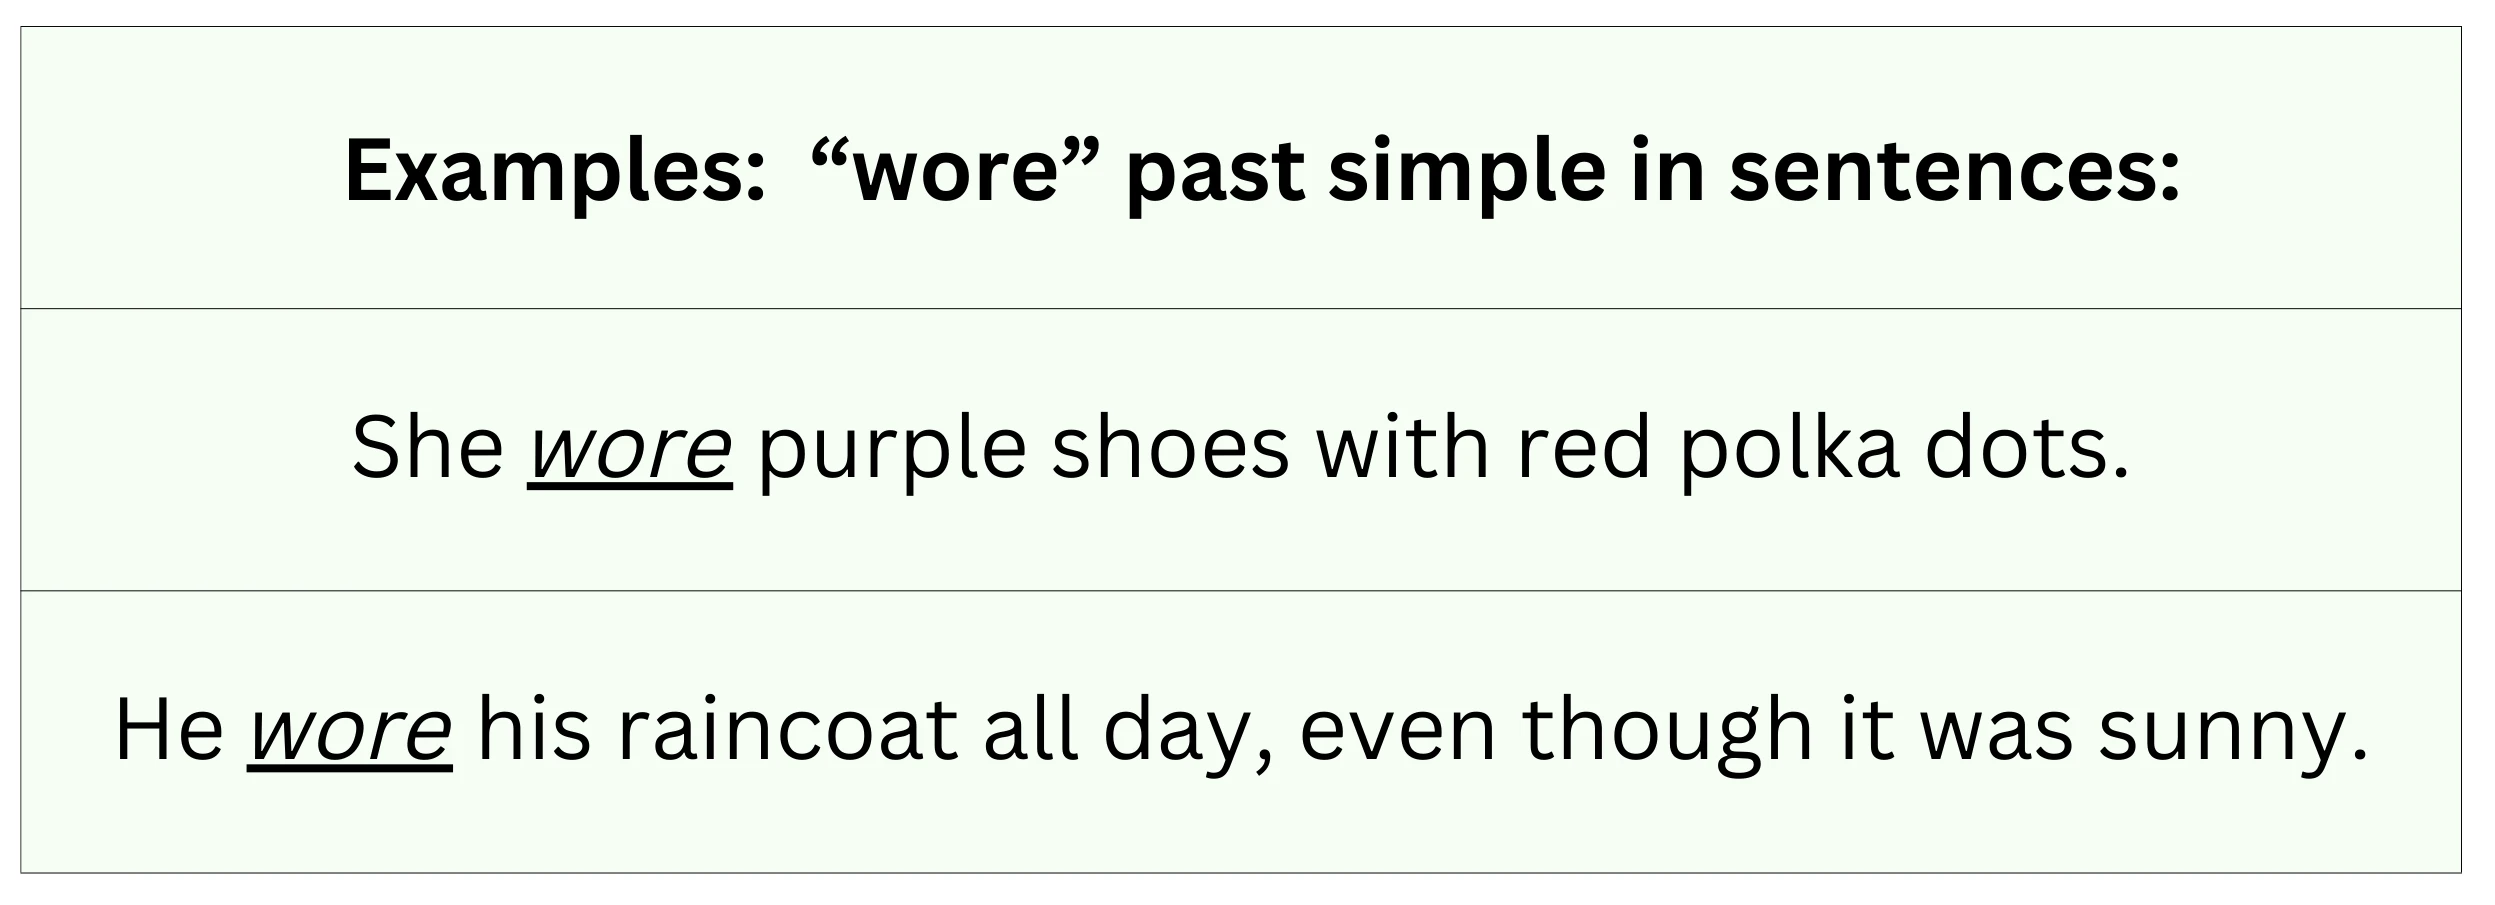 "Wore" in the past simple tense in sentences.